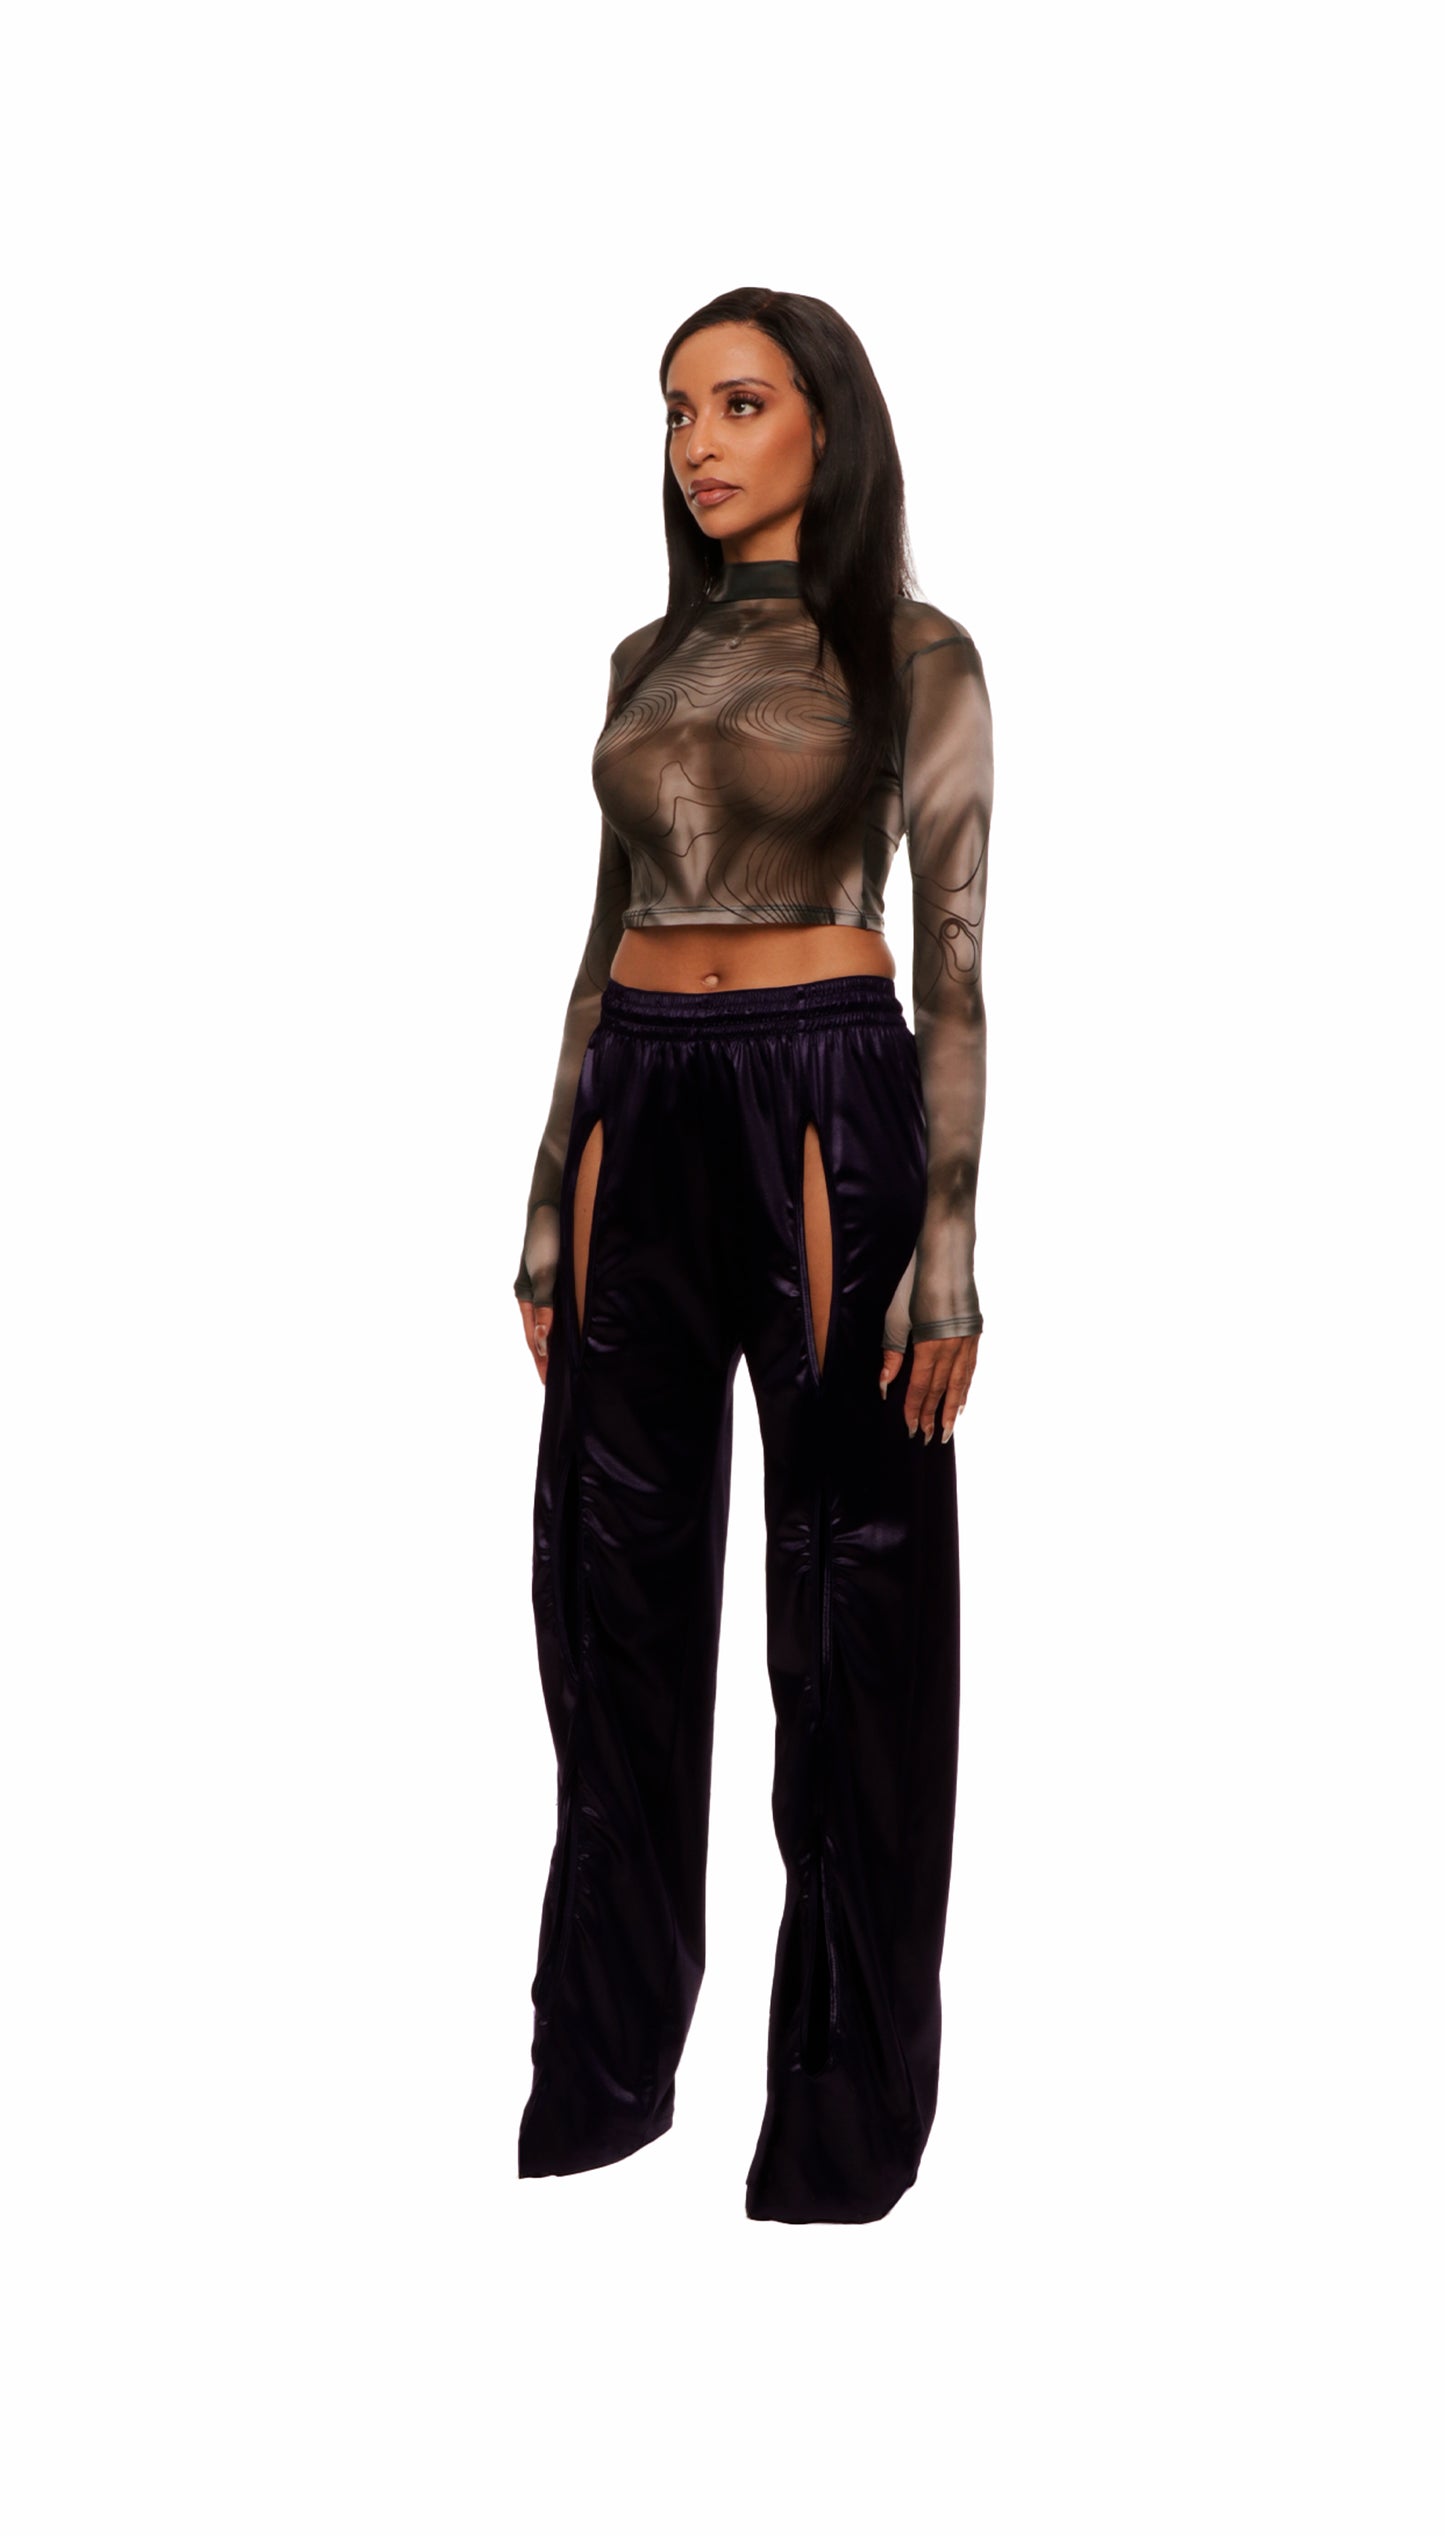 Woman who looks like Beyoncé or Aaliyah wears berry colored stretch smooth nylon pants with open detail front, paired with a grey stretch mesh long sleeve shirt top. Left view.